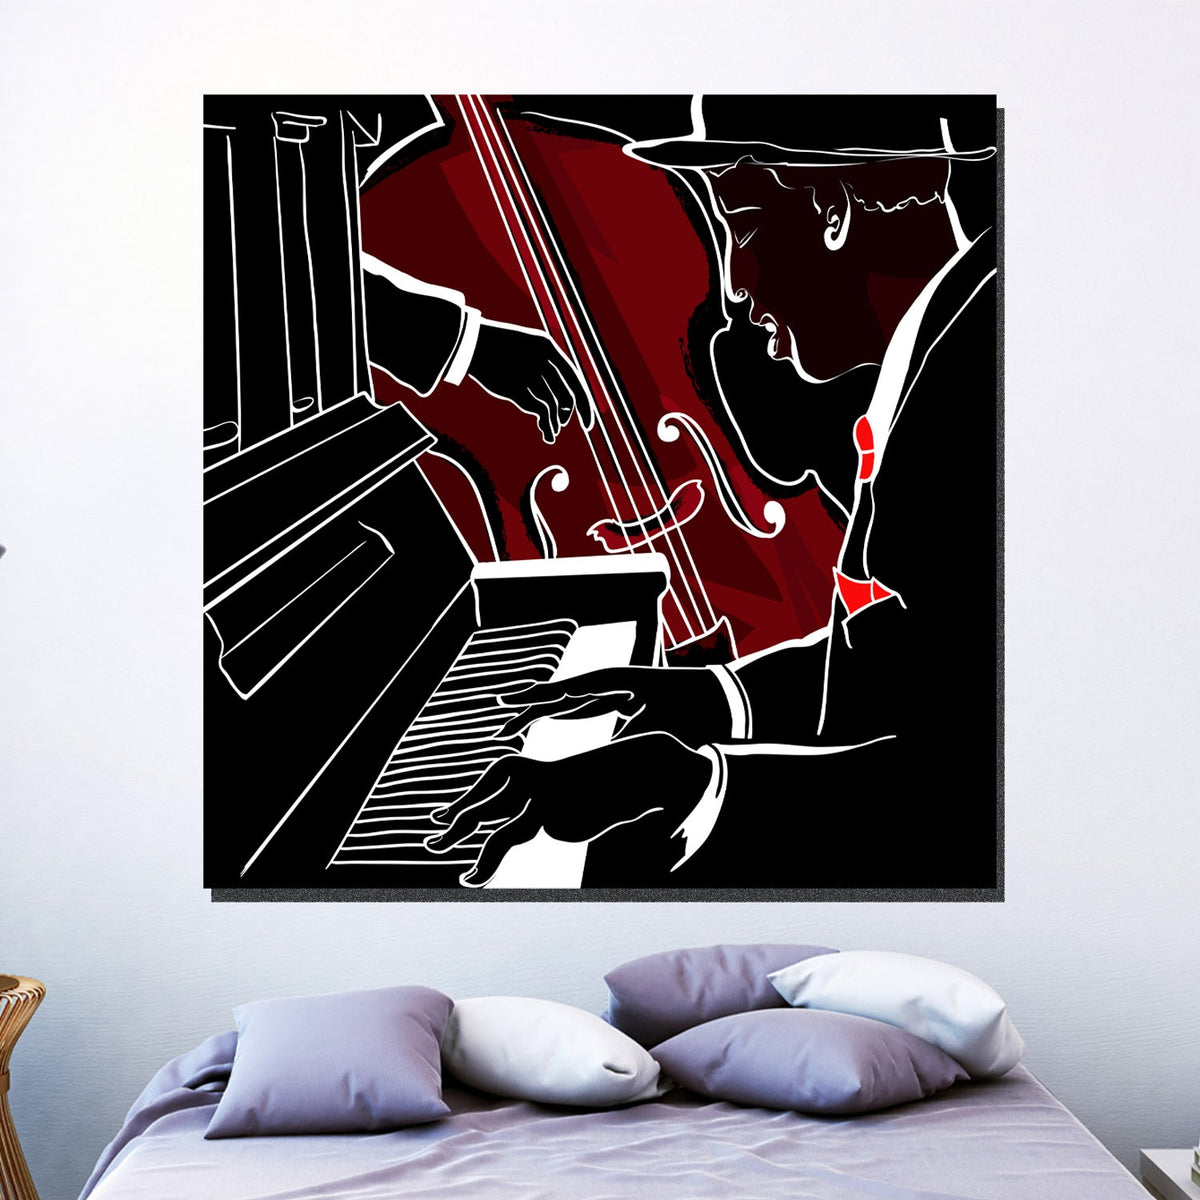 https://cdn.shopify.com/s/files/1/0387/9986/8044/products/PianoandDouble-bassCanvasArtprintStretched-2.jpg